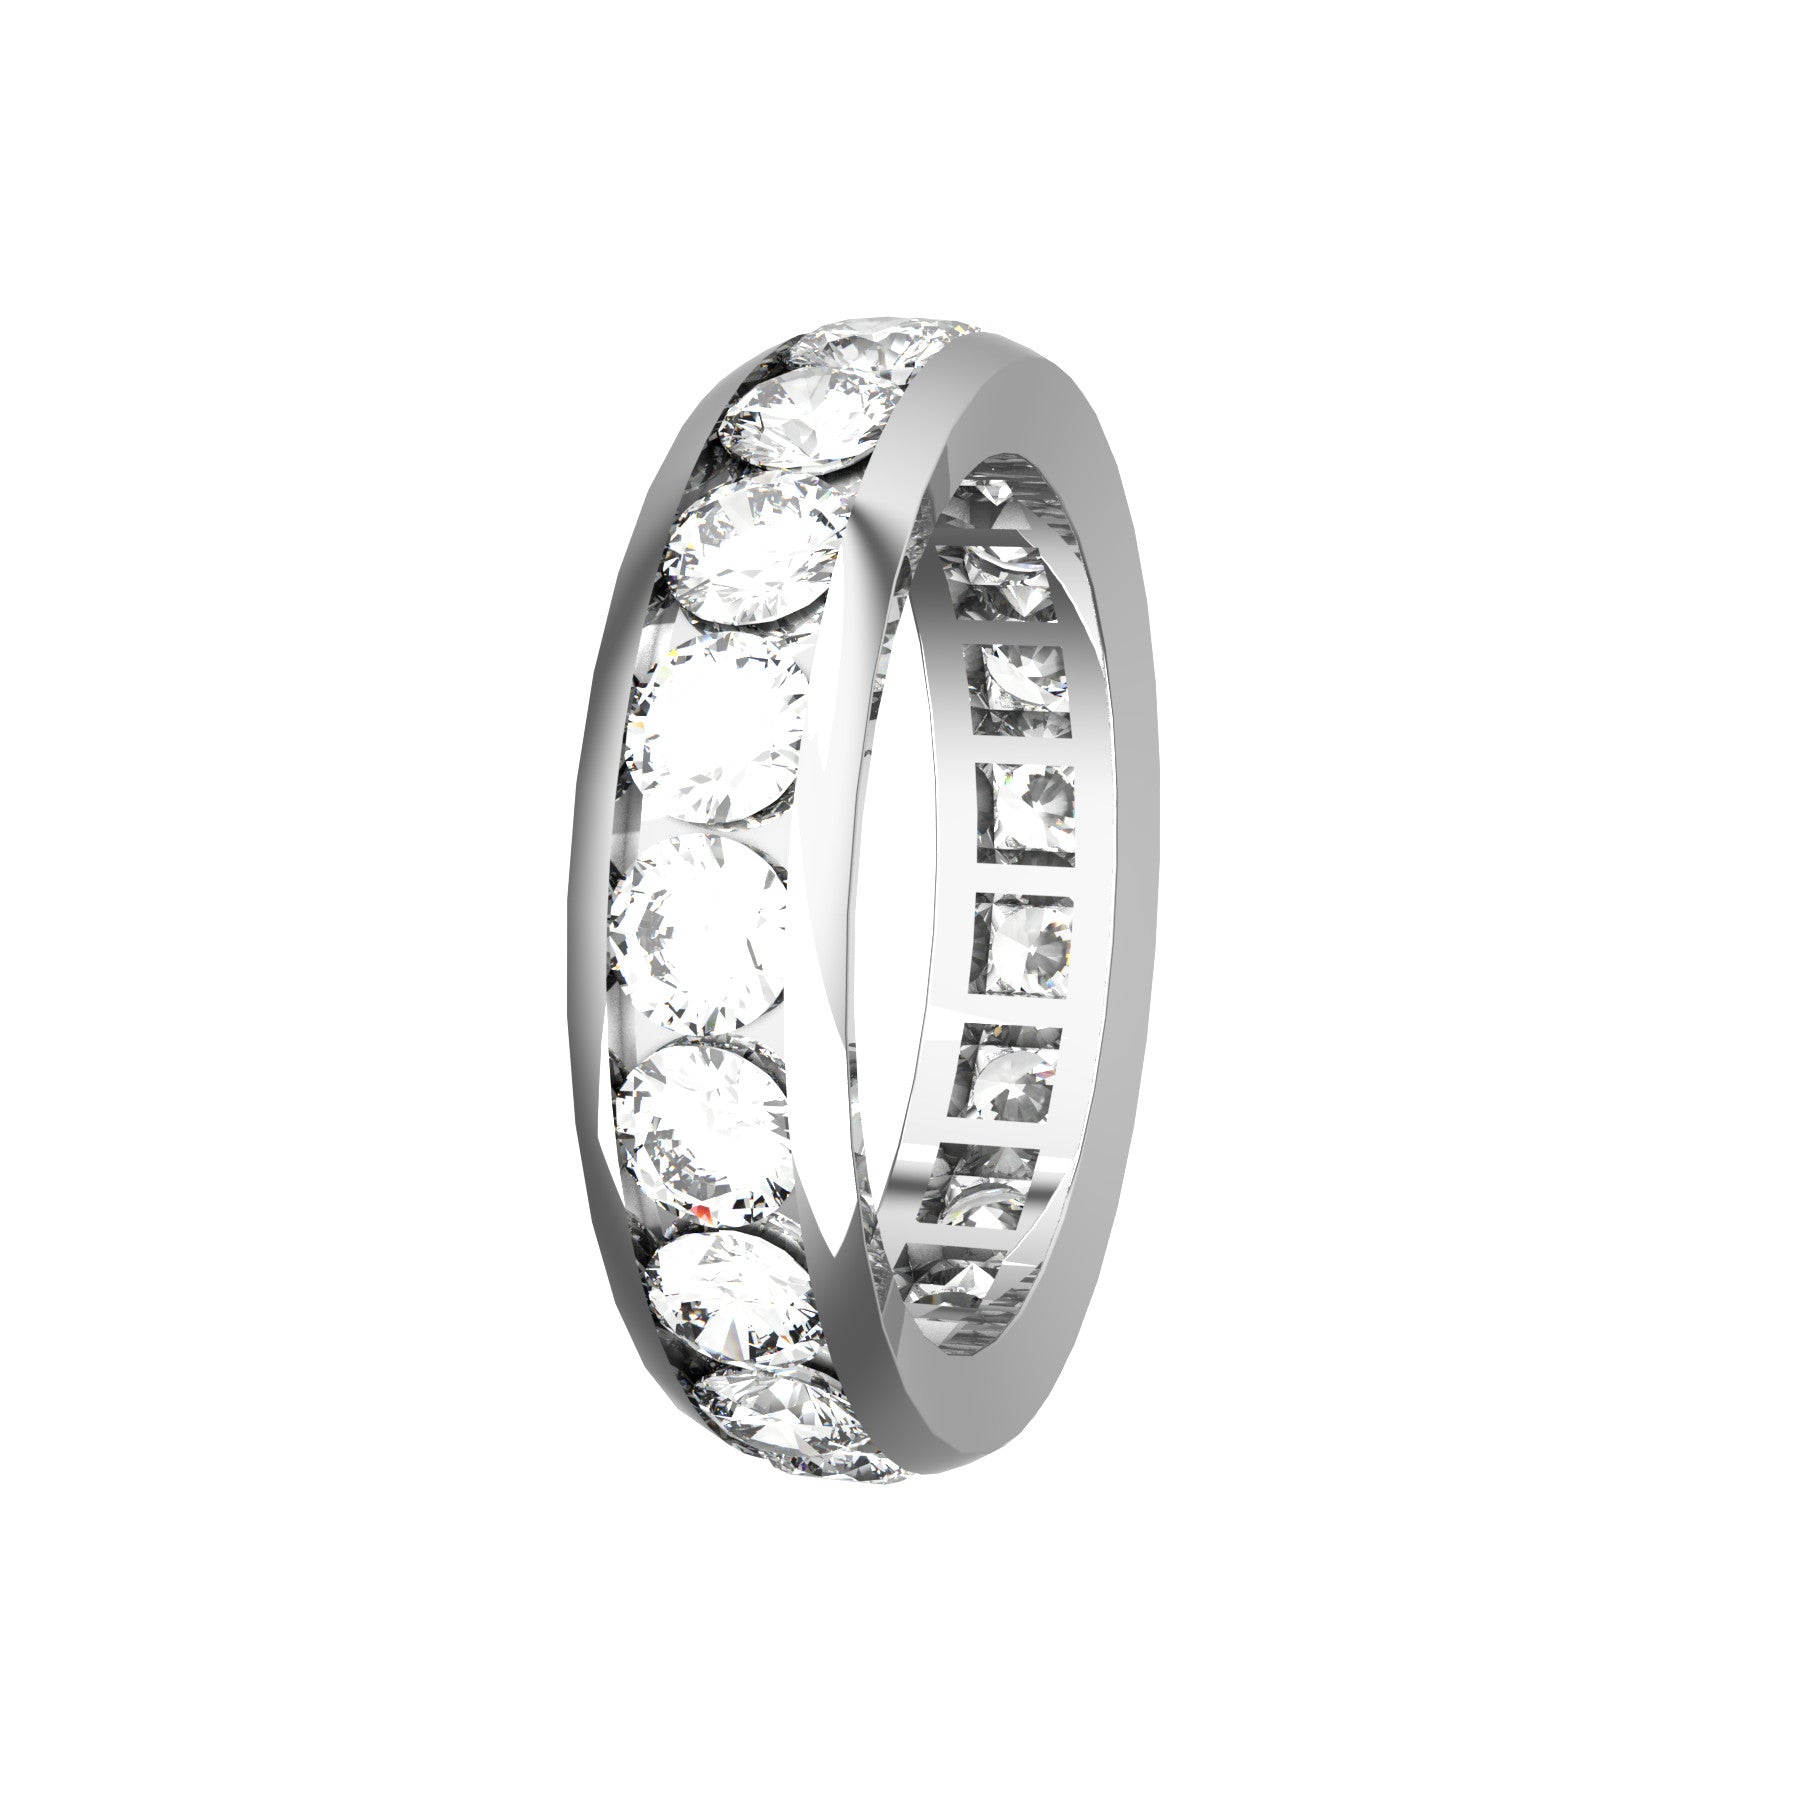 everlasting wedding band, 18 k white gold, 0,13 ct round natural diamonds, weight about 4,90 g. (0,17 oz), width 5,00 mm